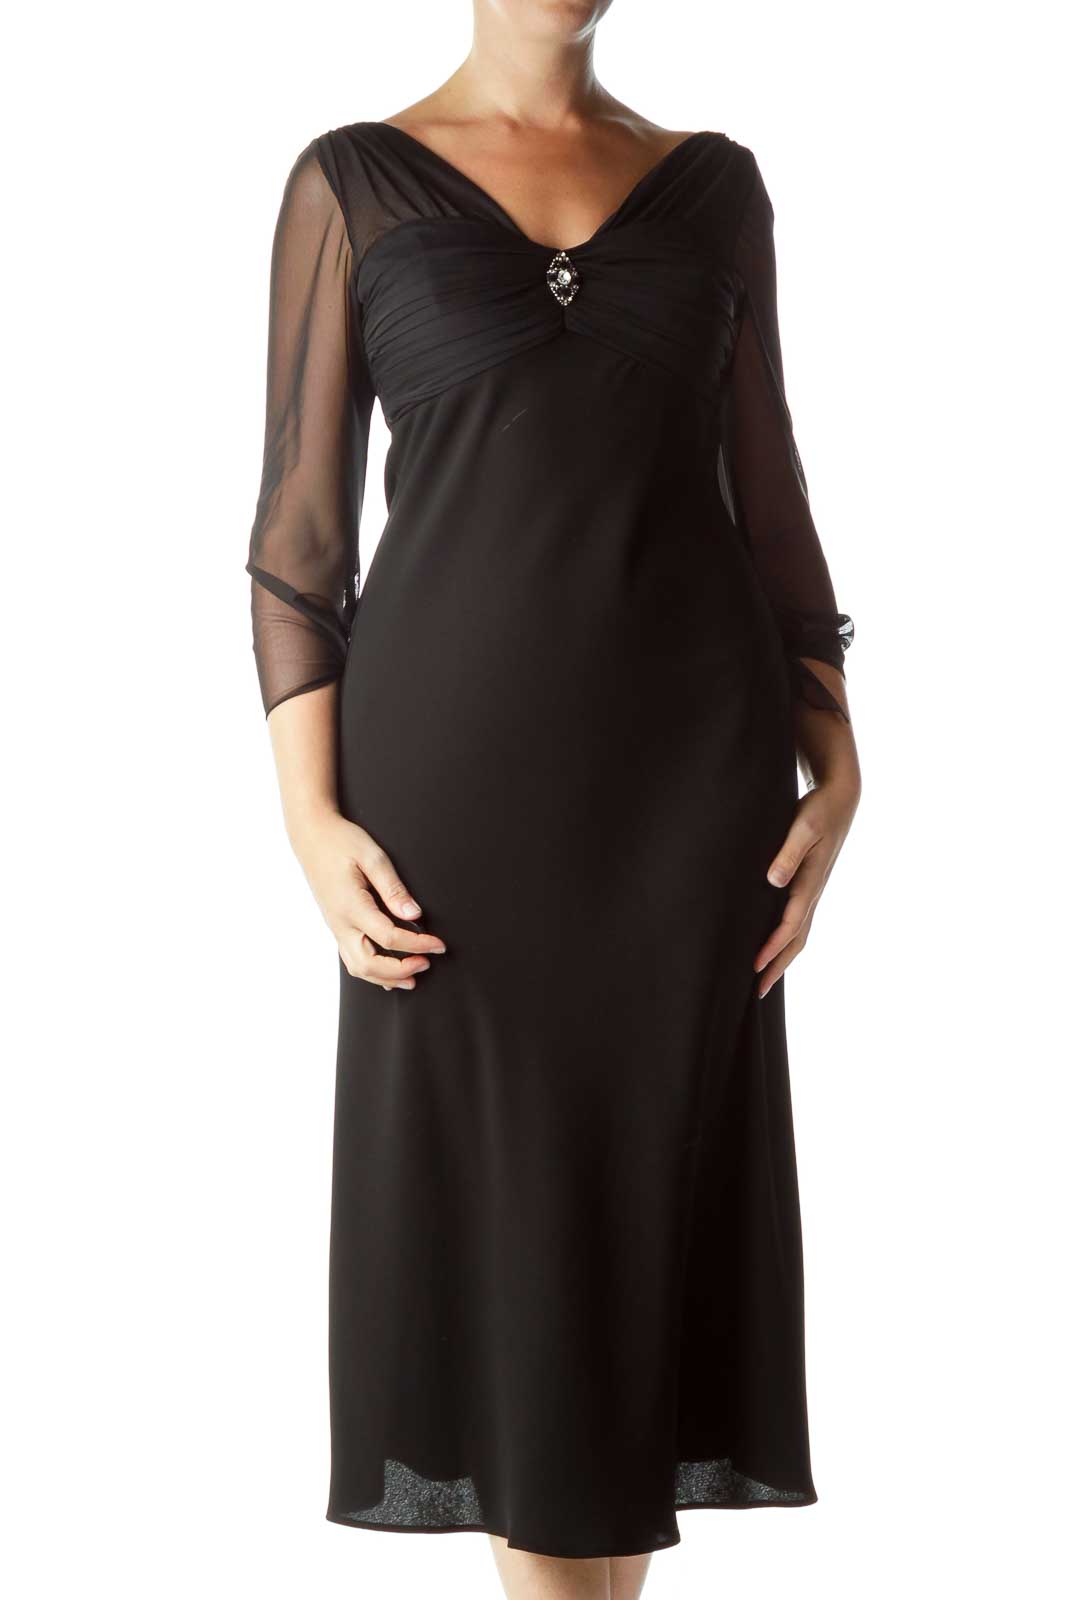 Black Sheer Evening Dress with Brooch Front